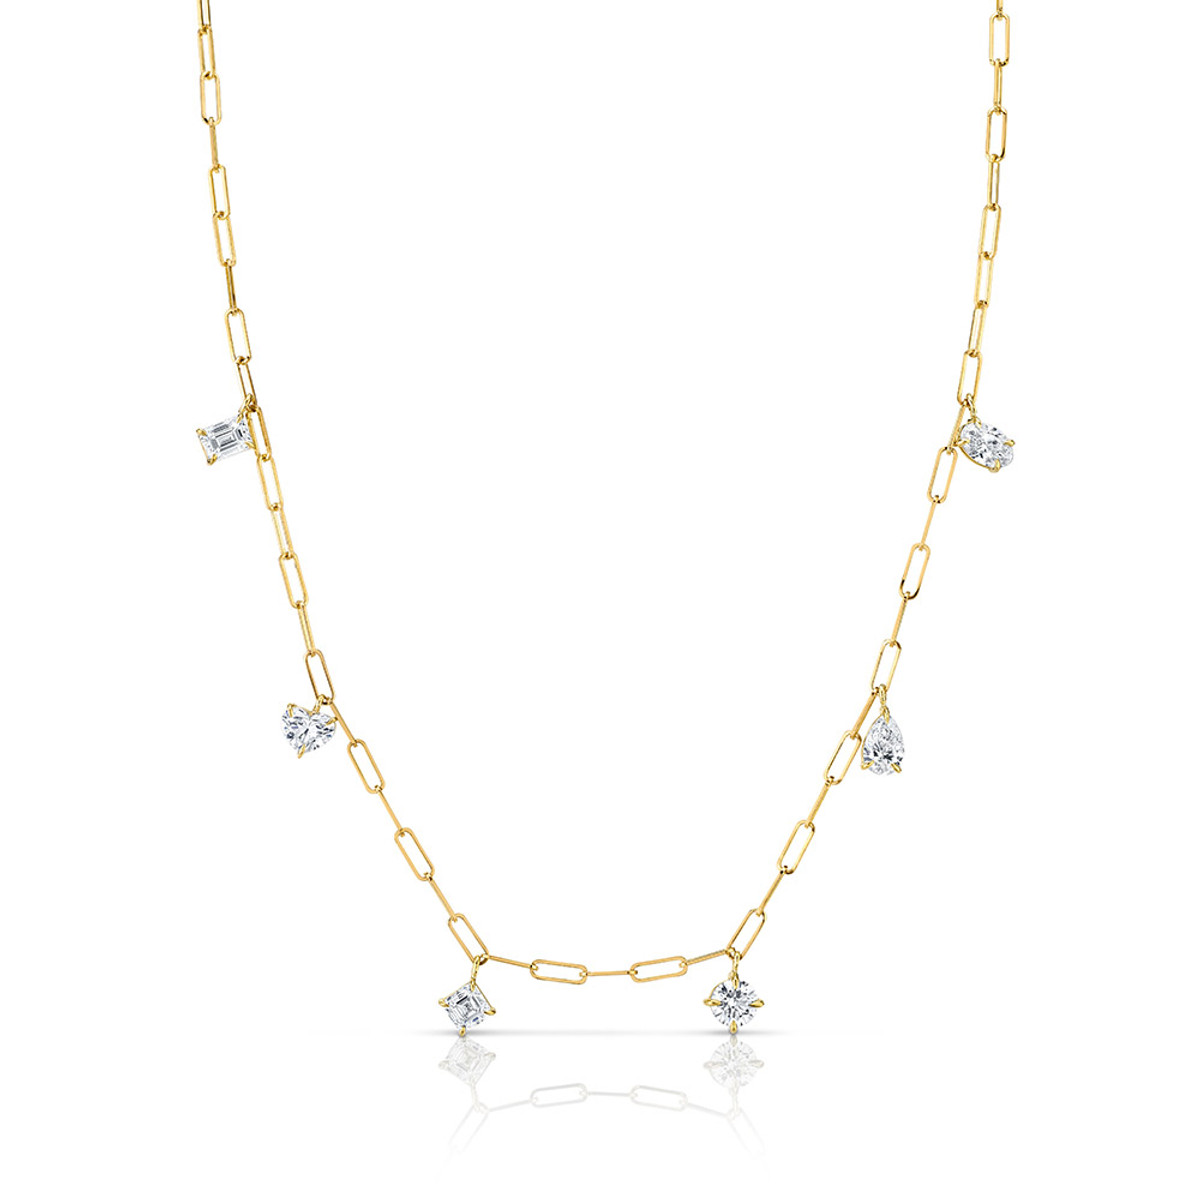 Hyde Park Collection 18K Yellow Gold Diamond Charm Necklace-44005